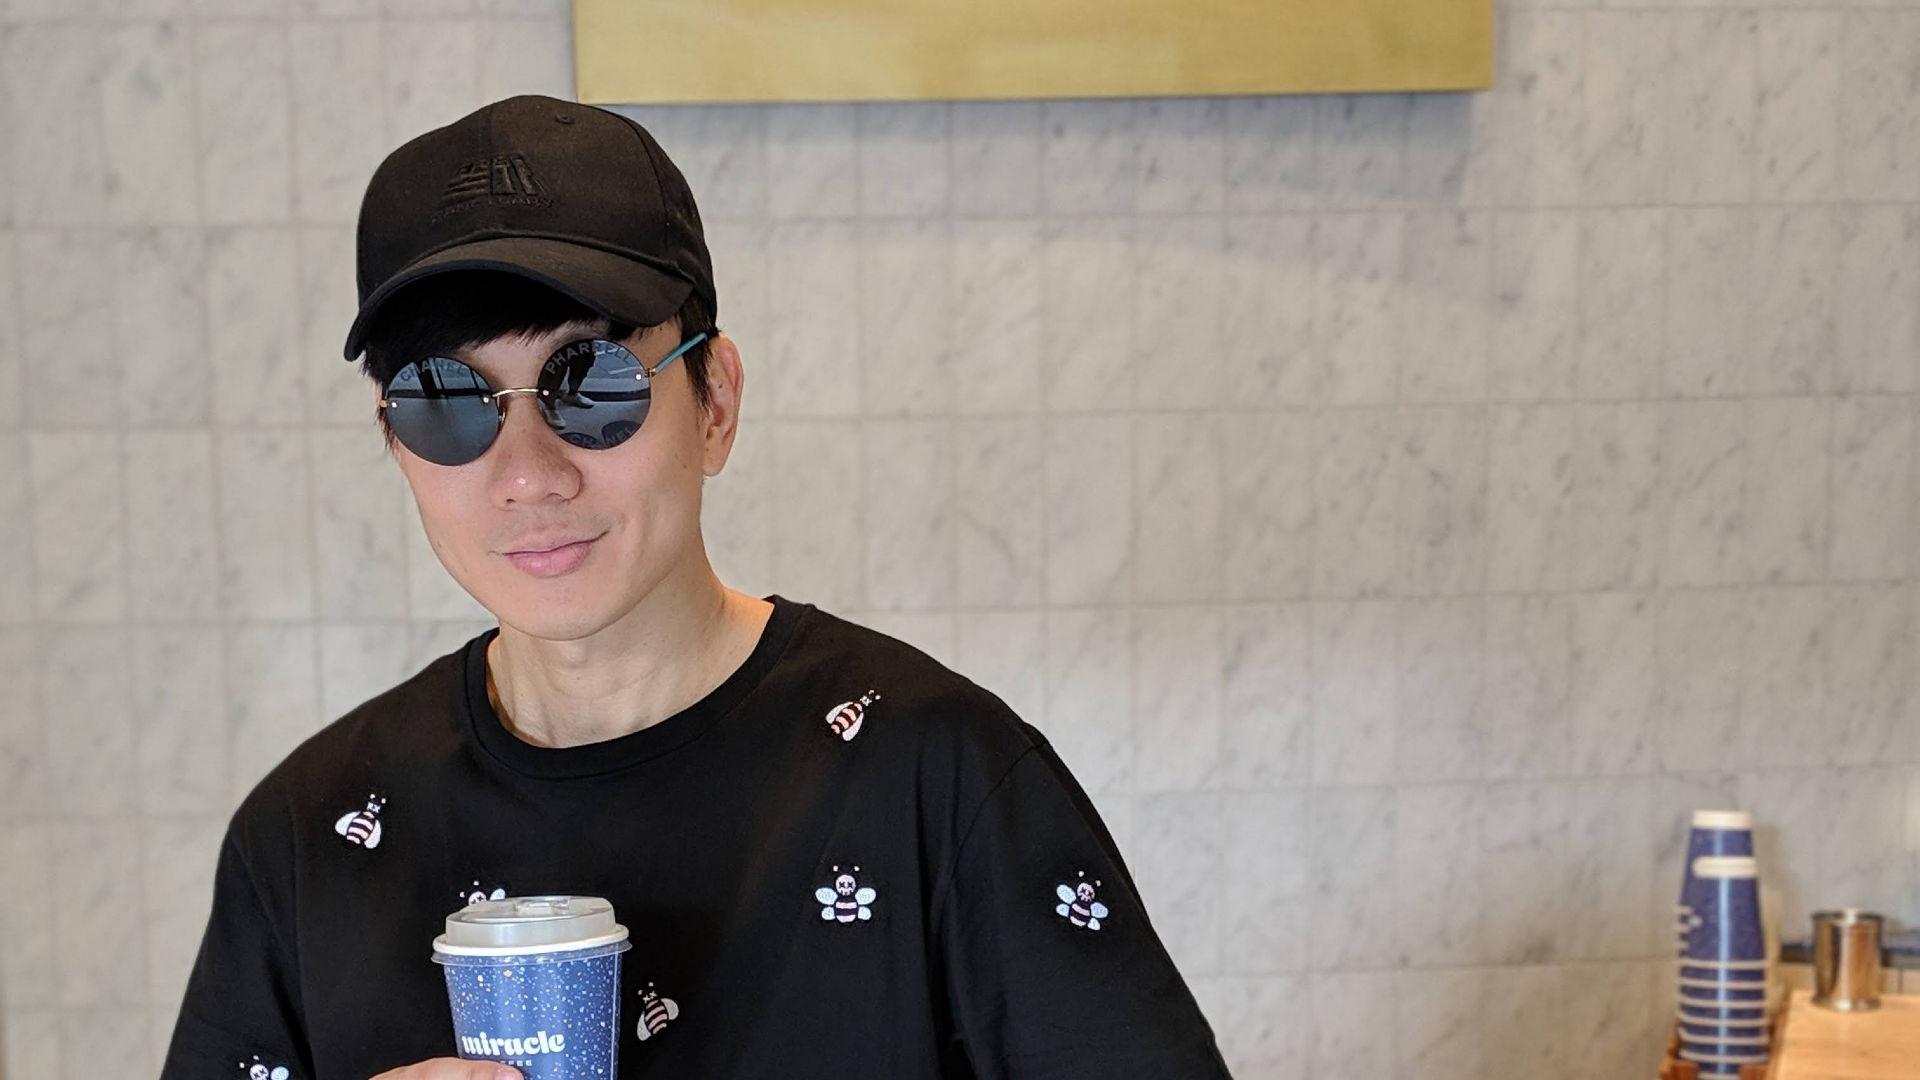 You can soon try JJ Lin's artisanal coffee at Marina Bay Sands